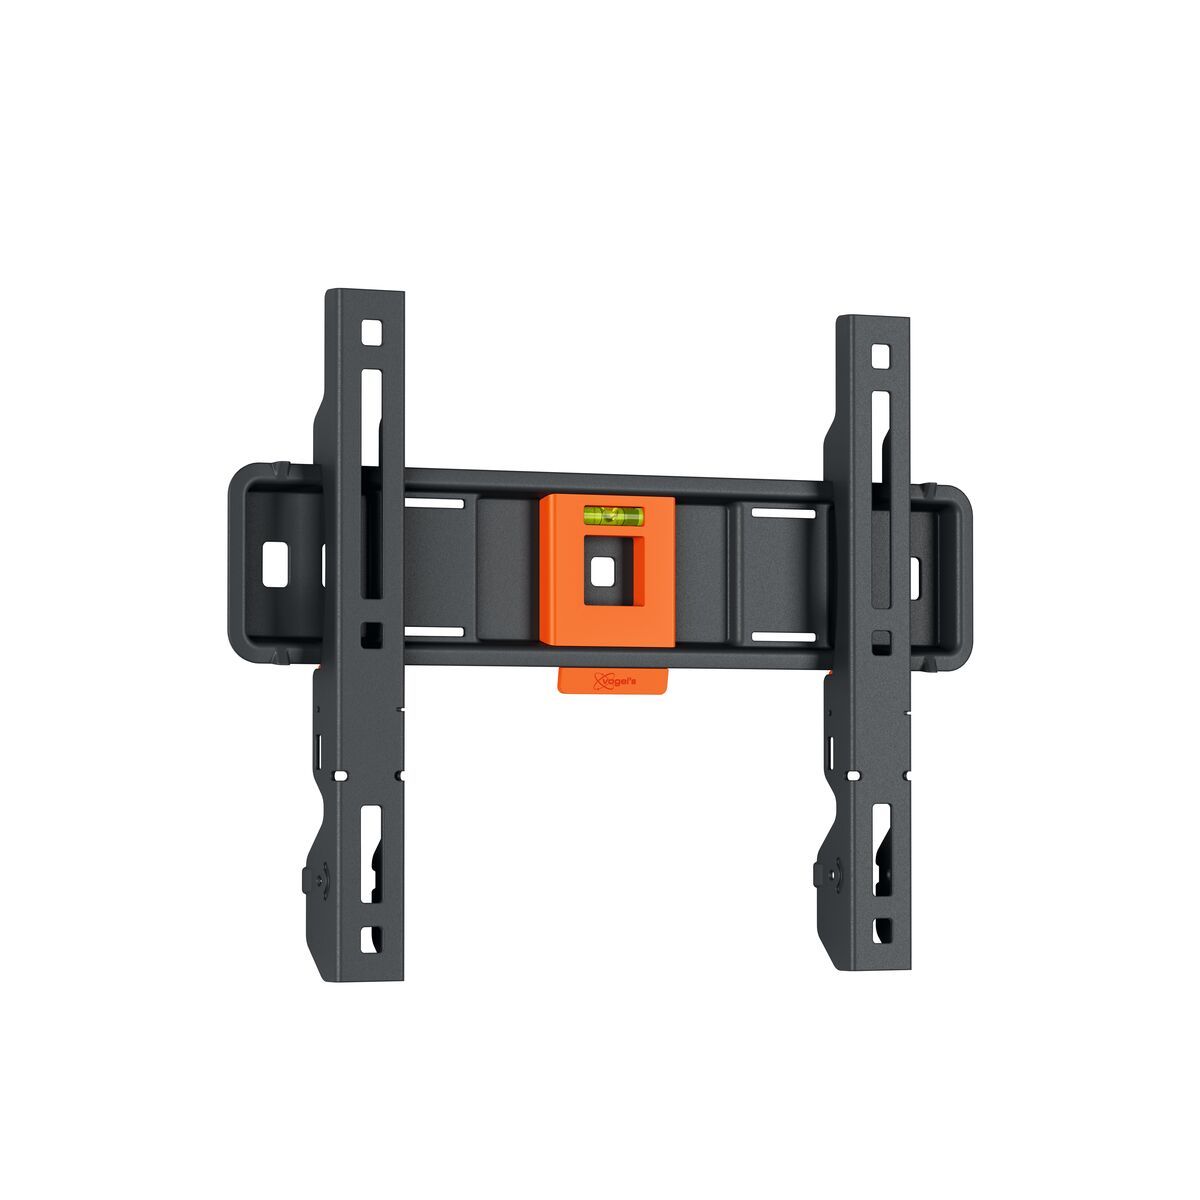 Vogel's TVM 1205 Fixed TV Wall Mount - Suitable for 19 up to 50 inch TVs - Product